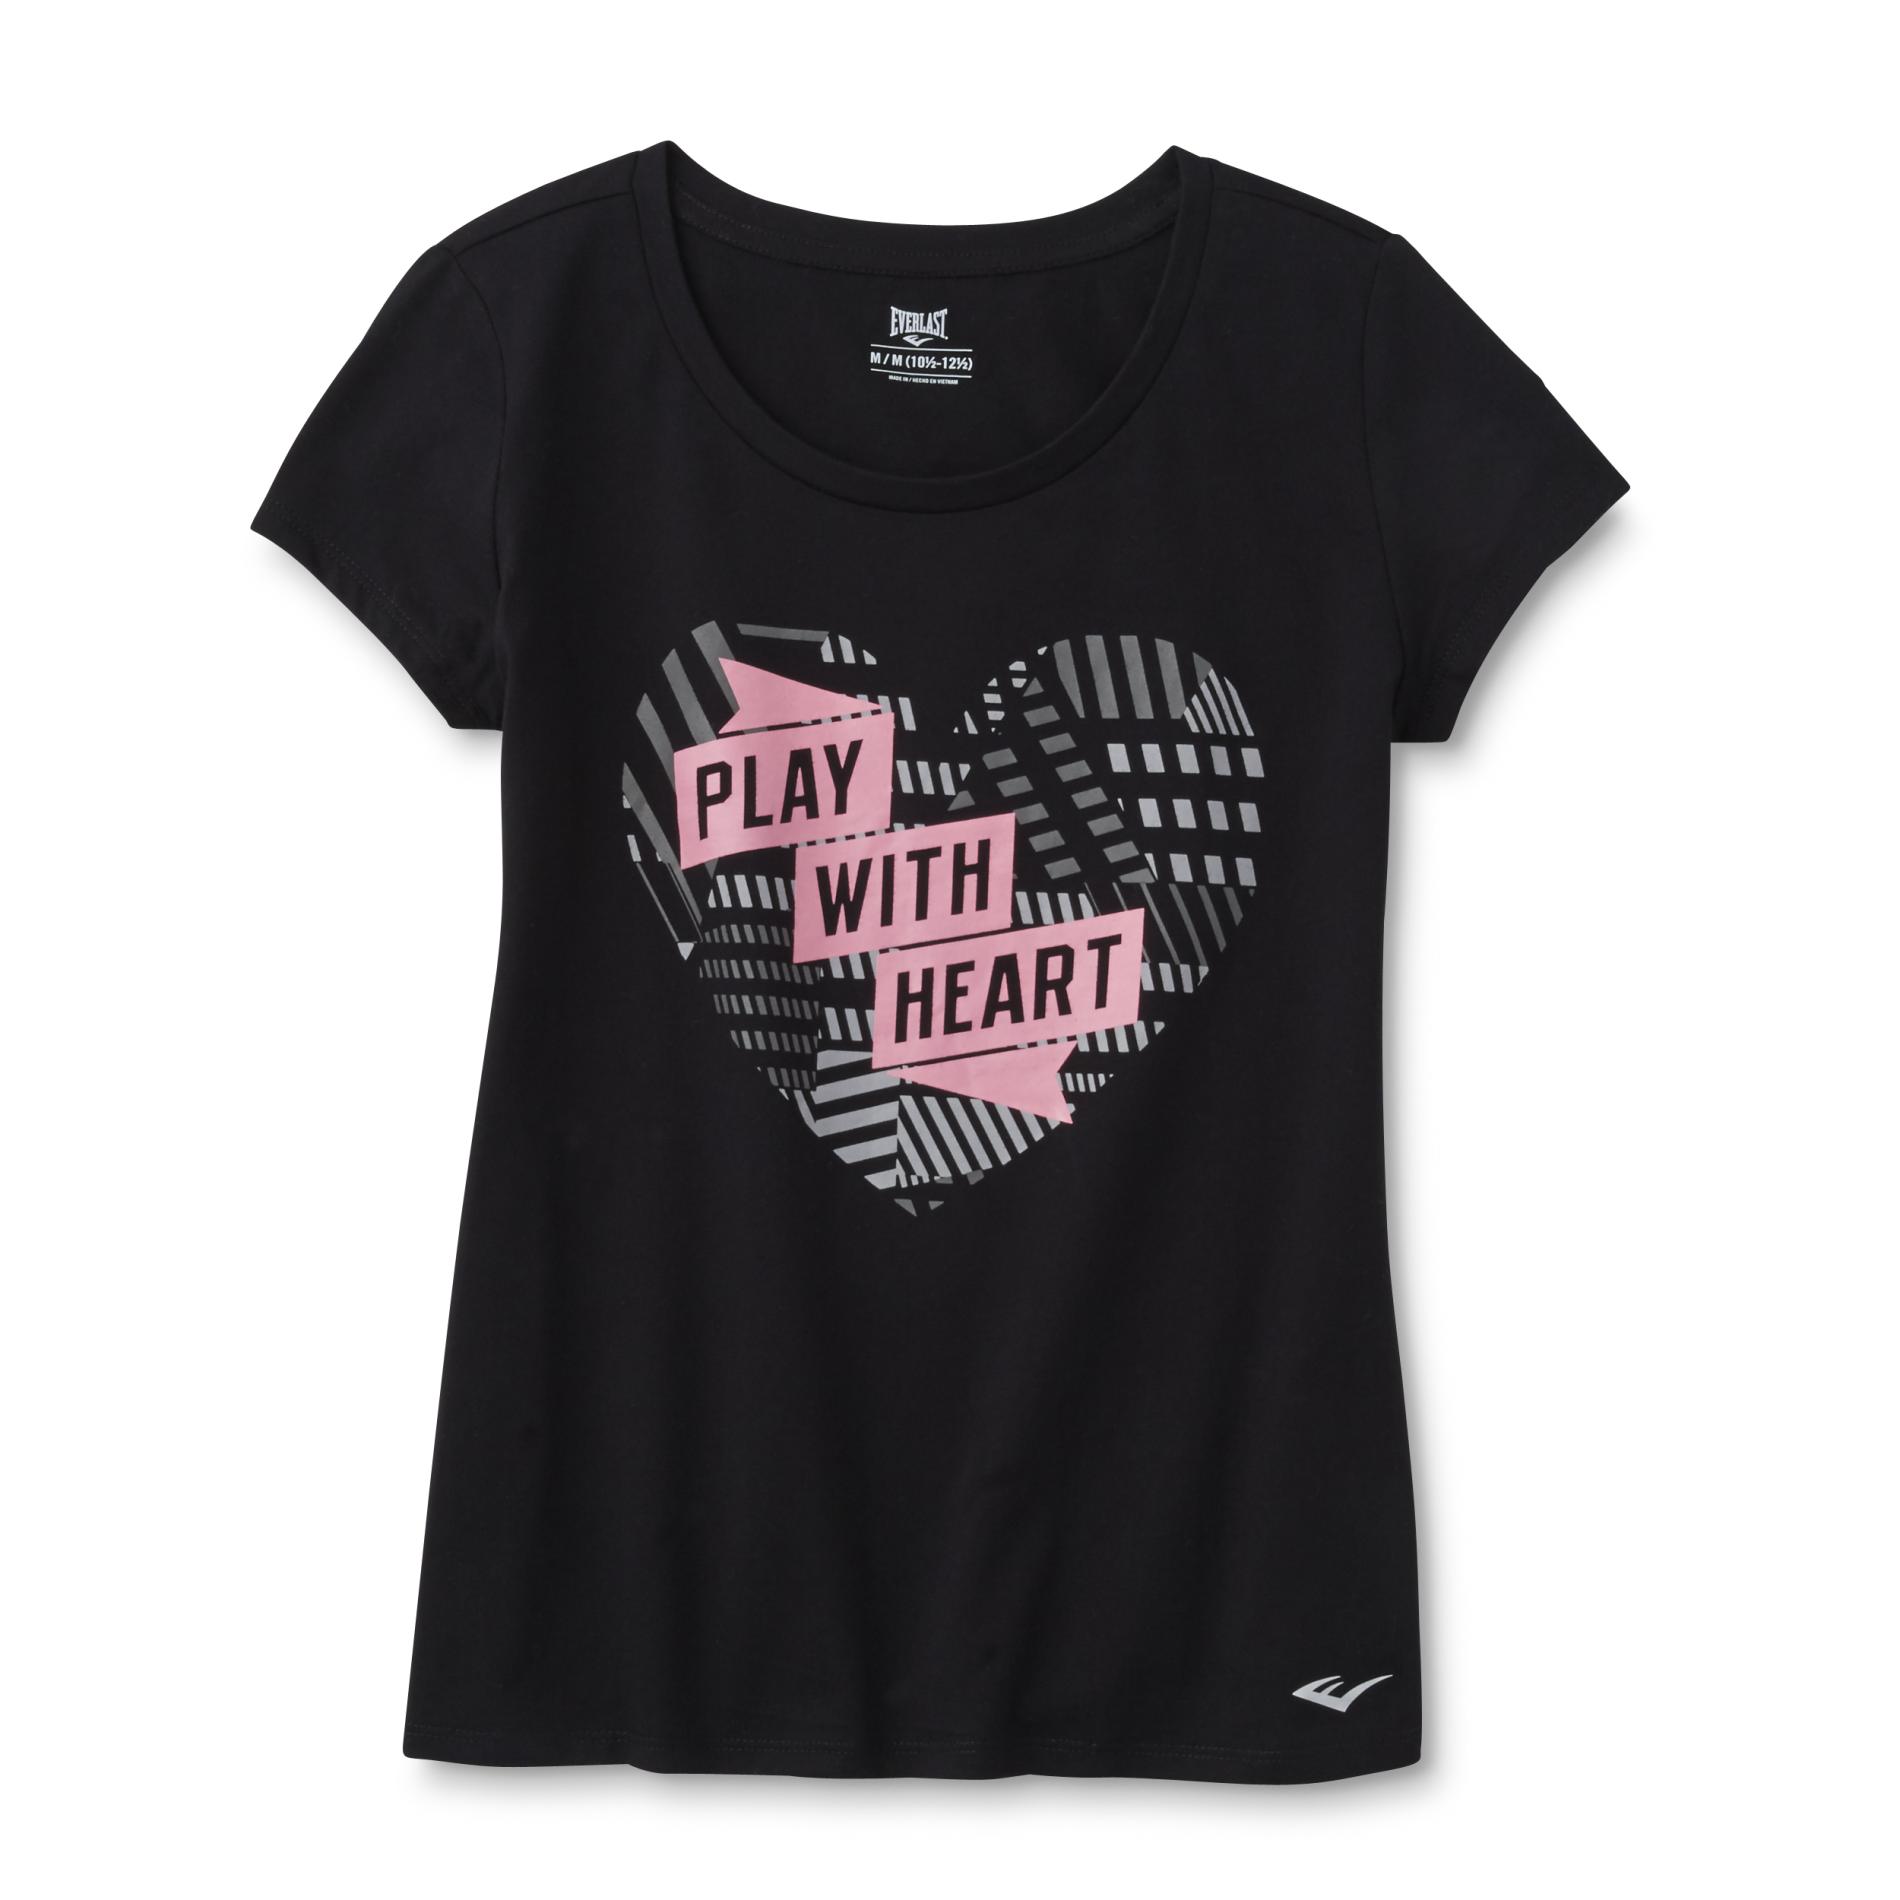 Everlast&reg; Girls' Graphic Athletic T-Shirt - Play With Heart